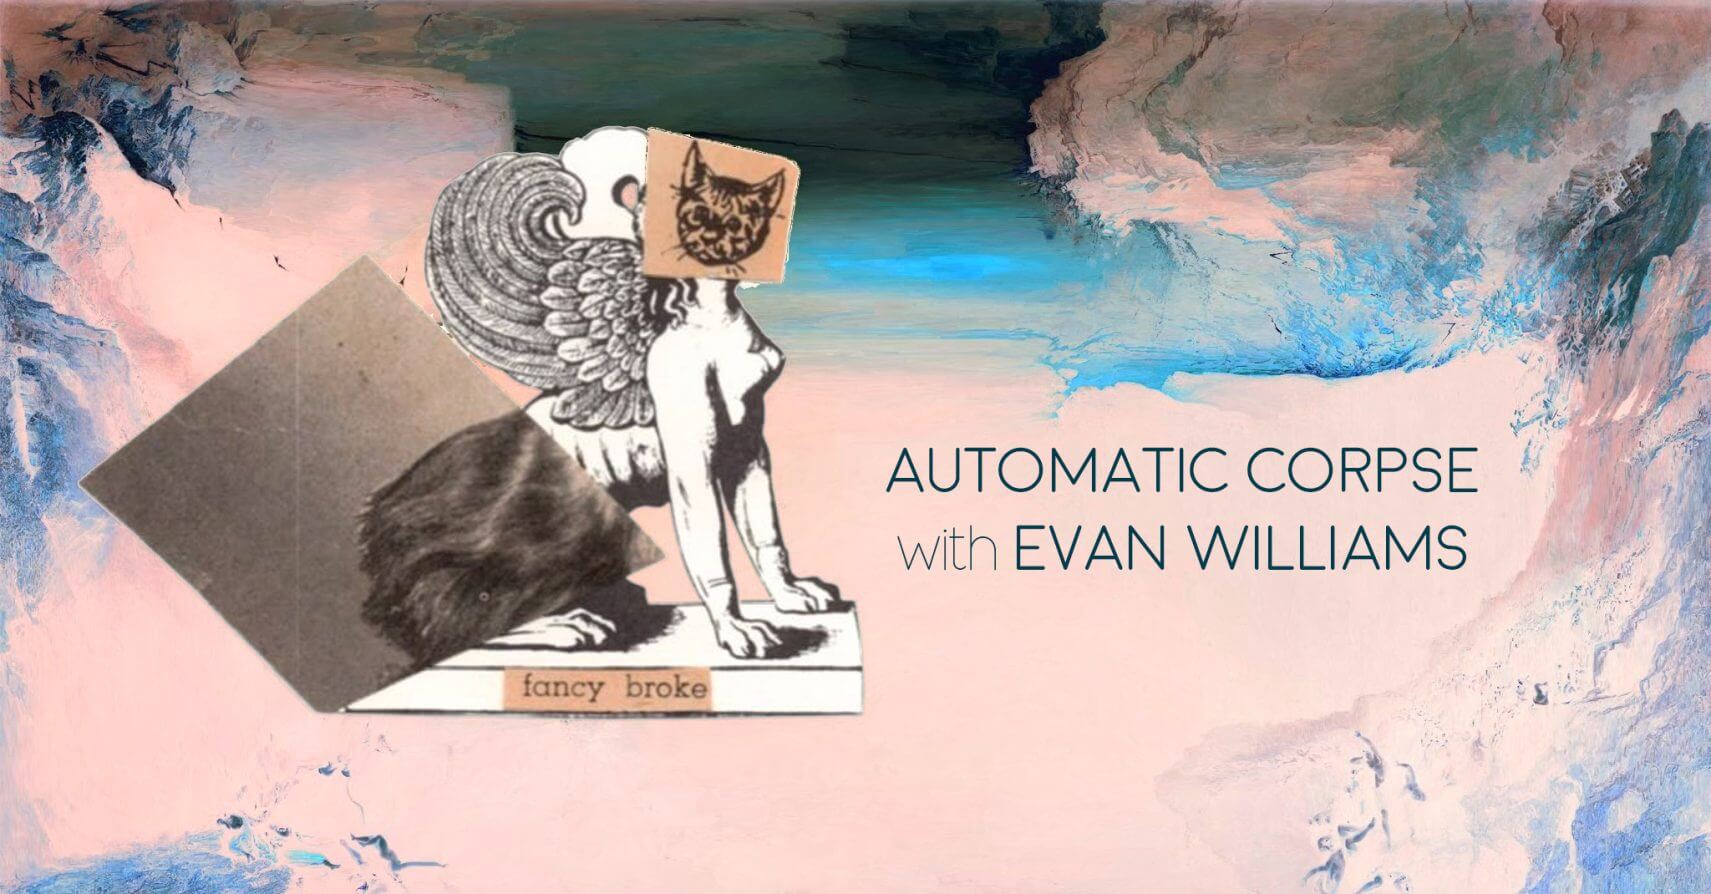 Automatic Corpse with Evan Williams